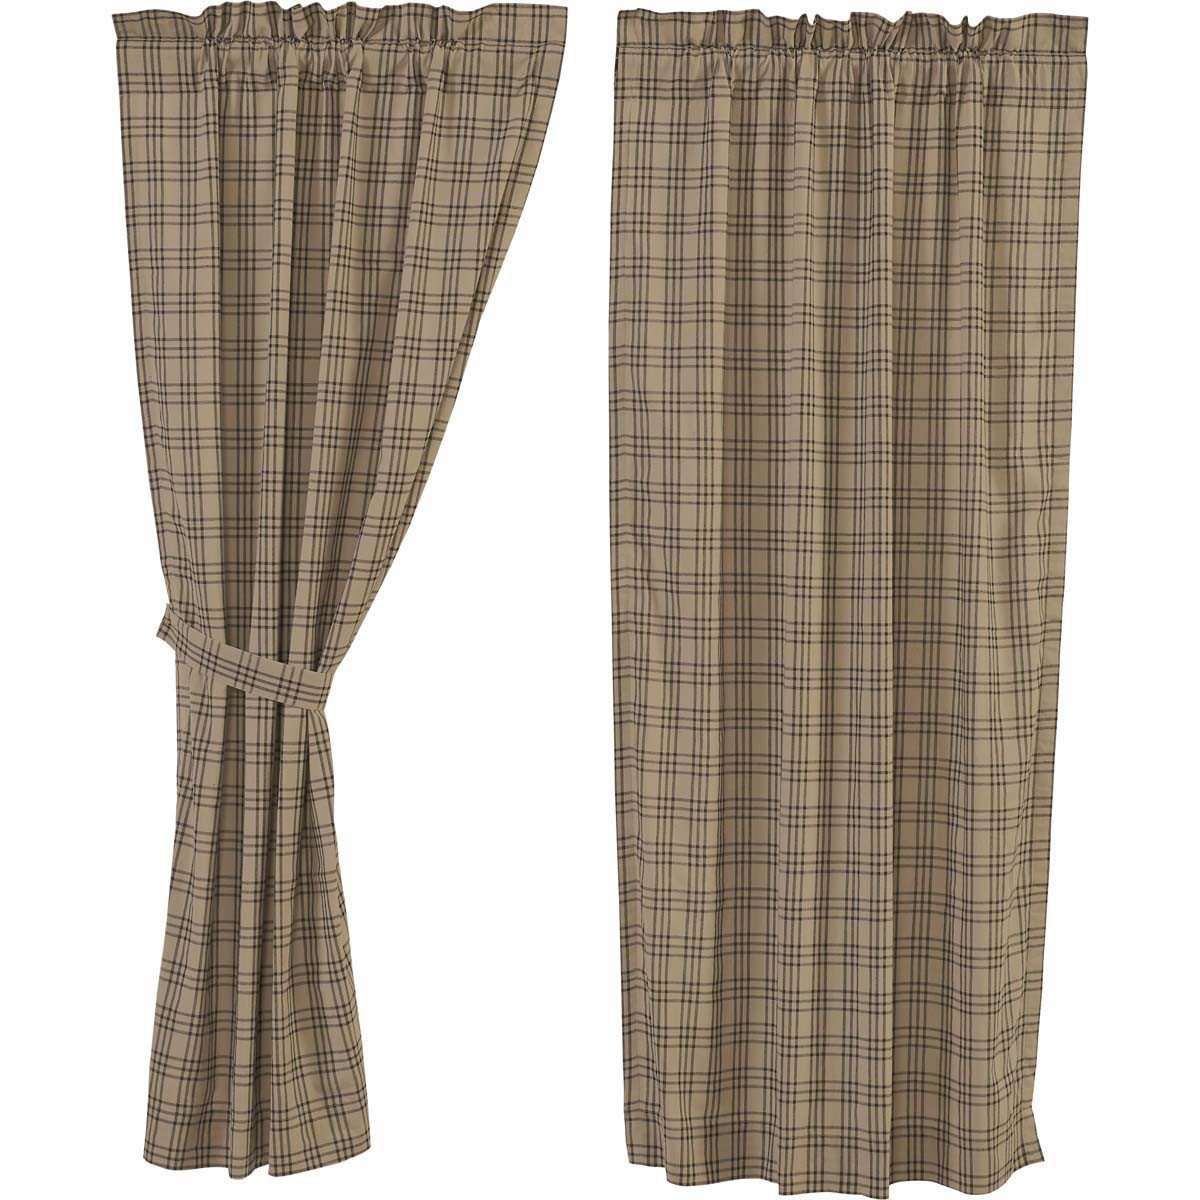 Sawyer Mill Charcoal Plaid Short Panel Country Curtain Set of 2 63"x36" - The Fox Decor